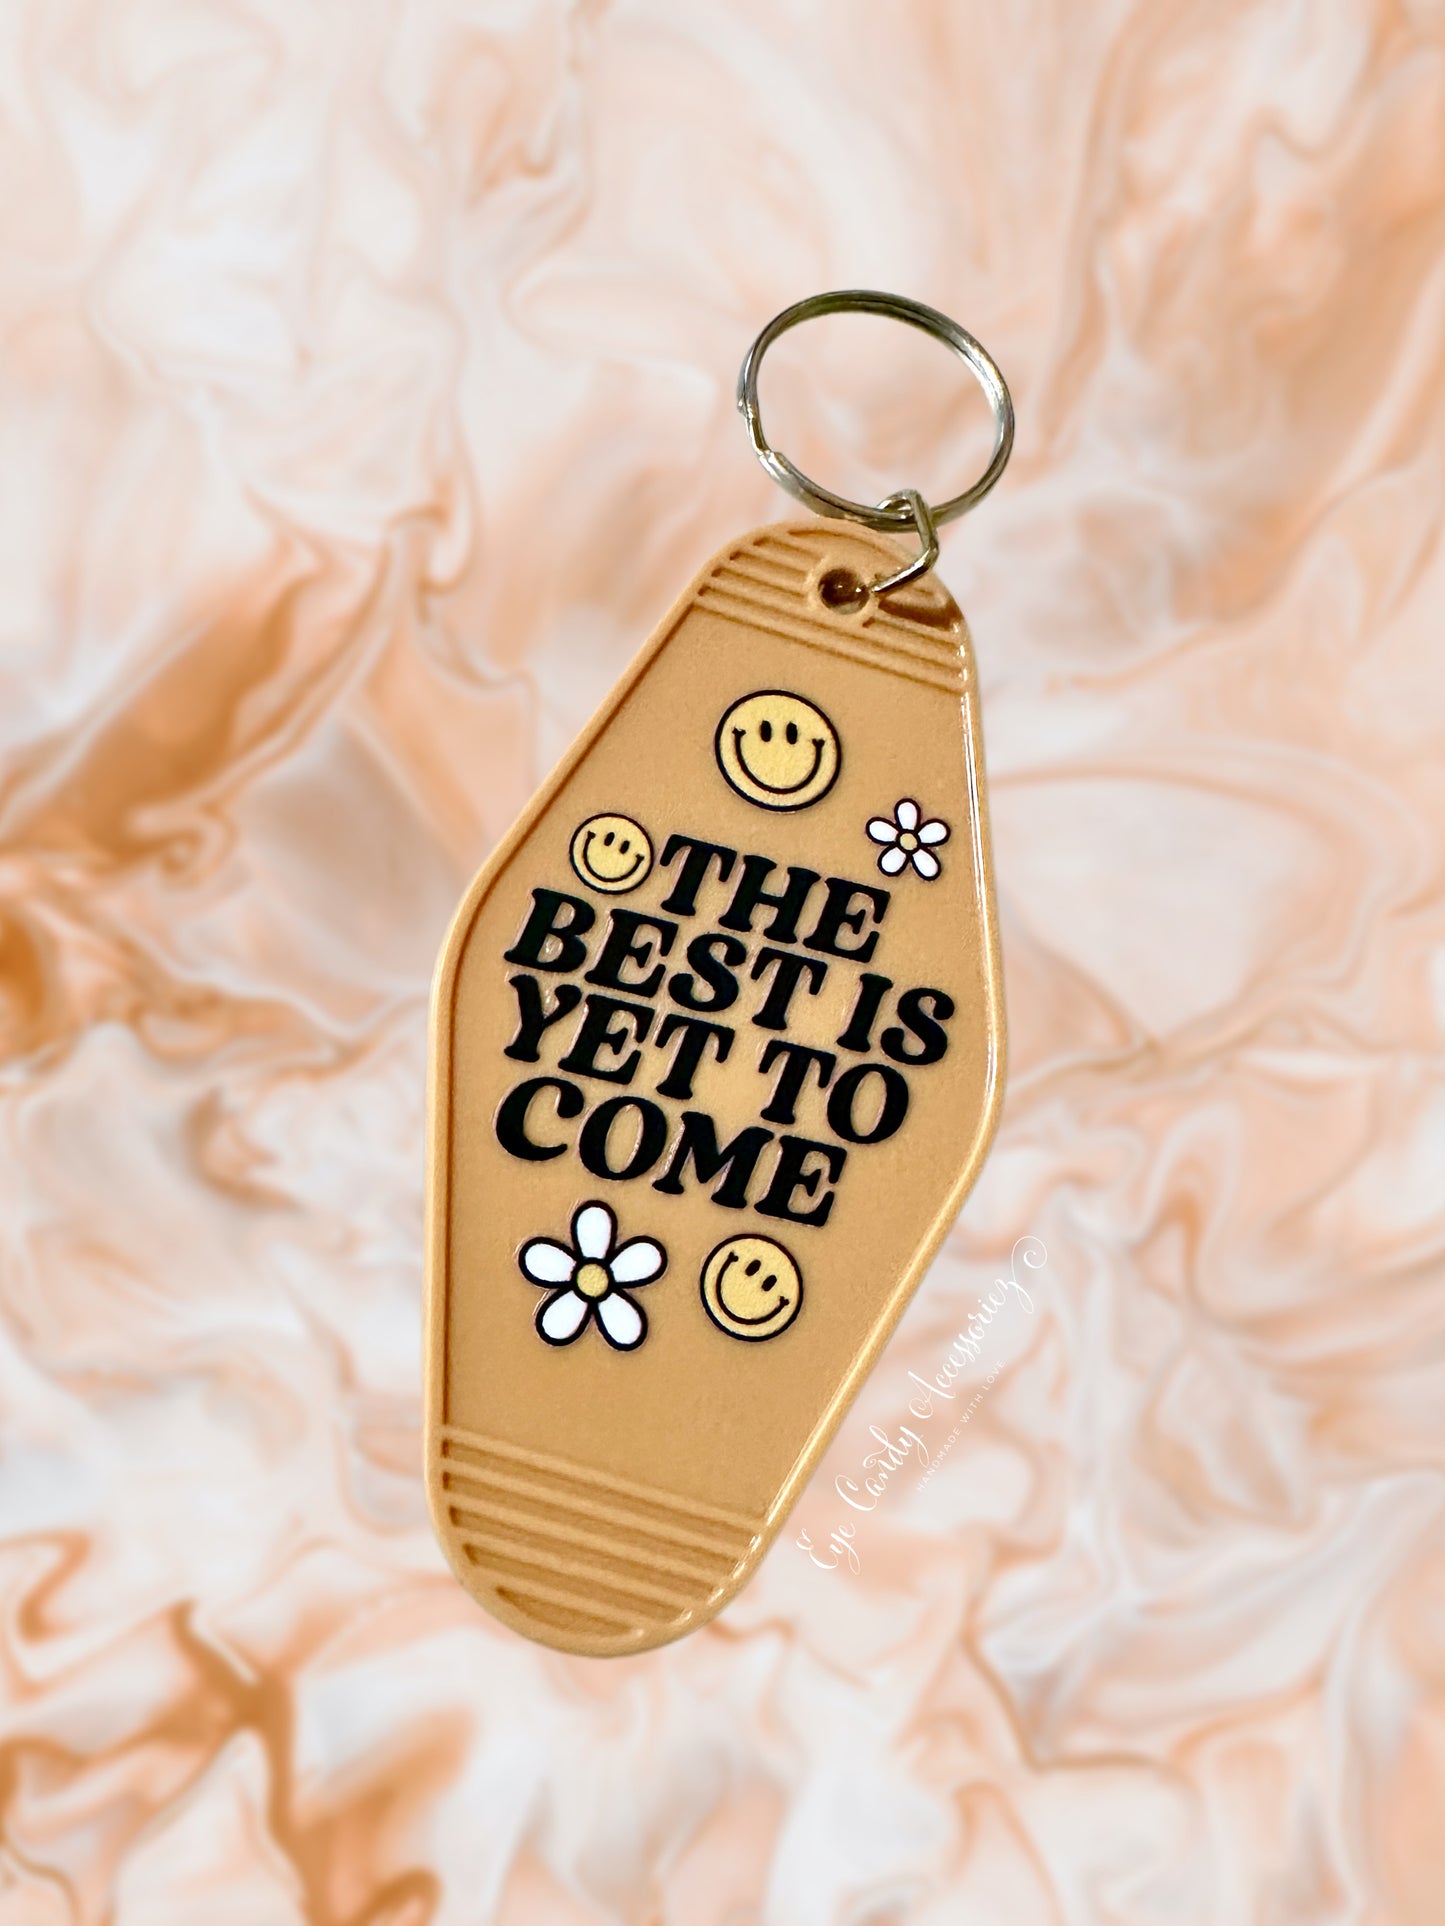 The Best is Yet to Come Retro Style Keychain